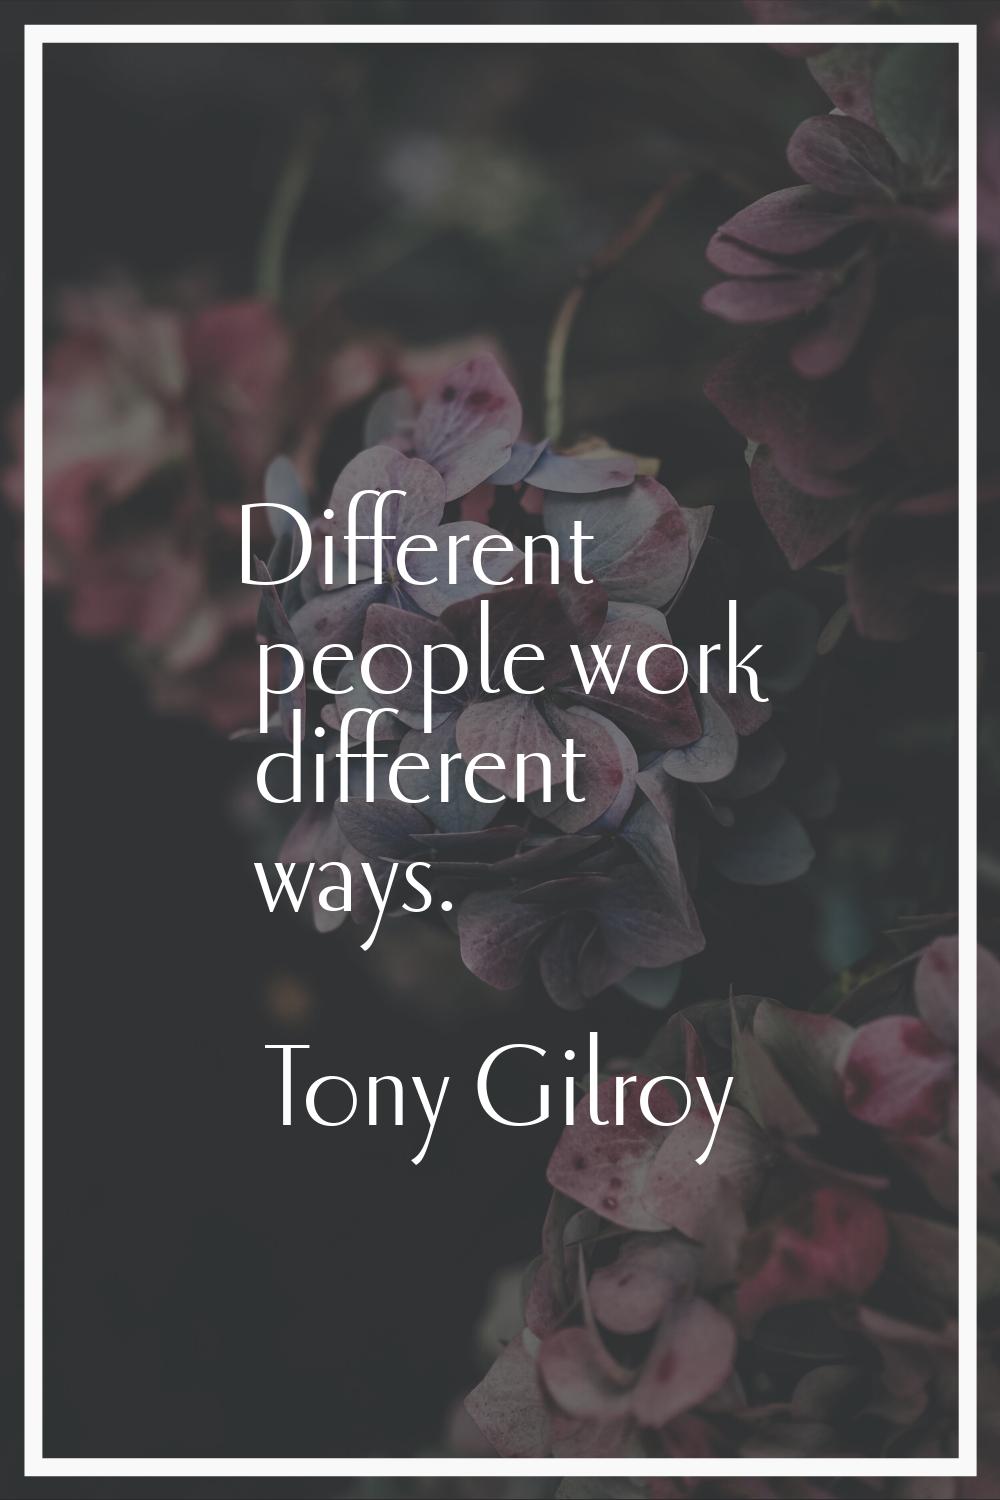 Different people work different ways.